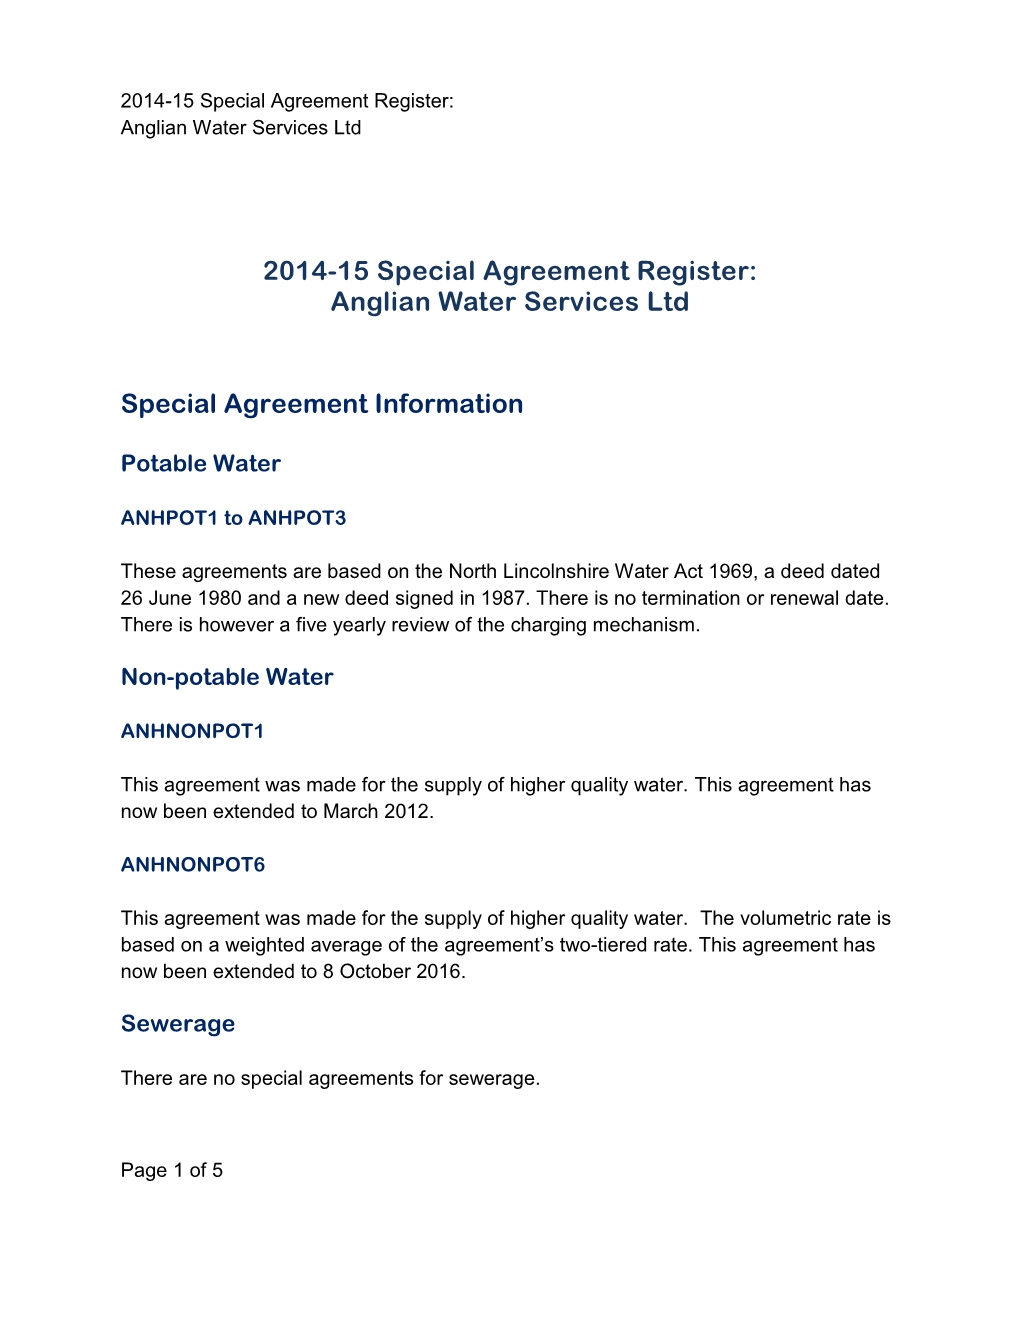 2014-15 Special Agreement Register: Anglian Water Services Ltd Special Agreement Information